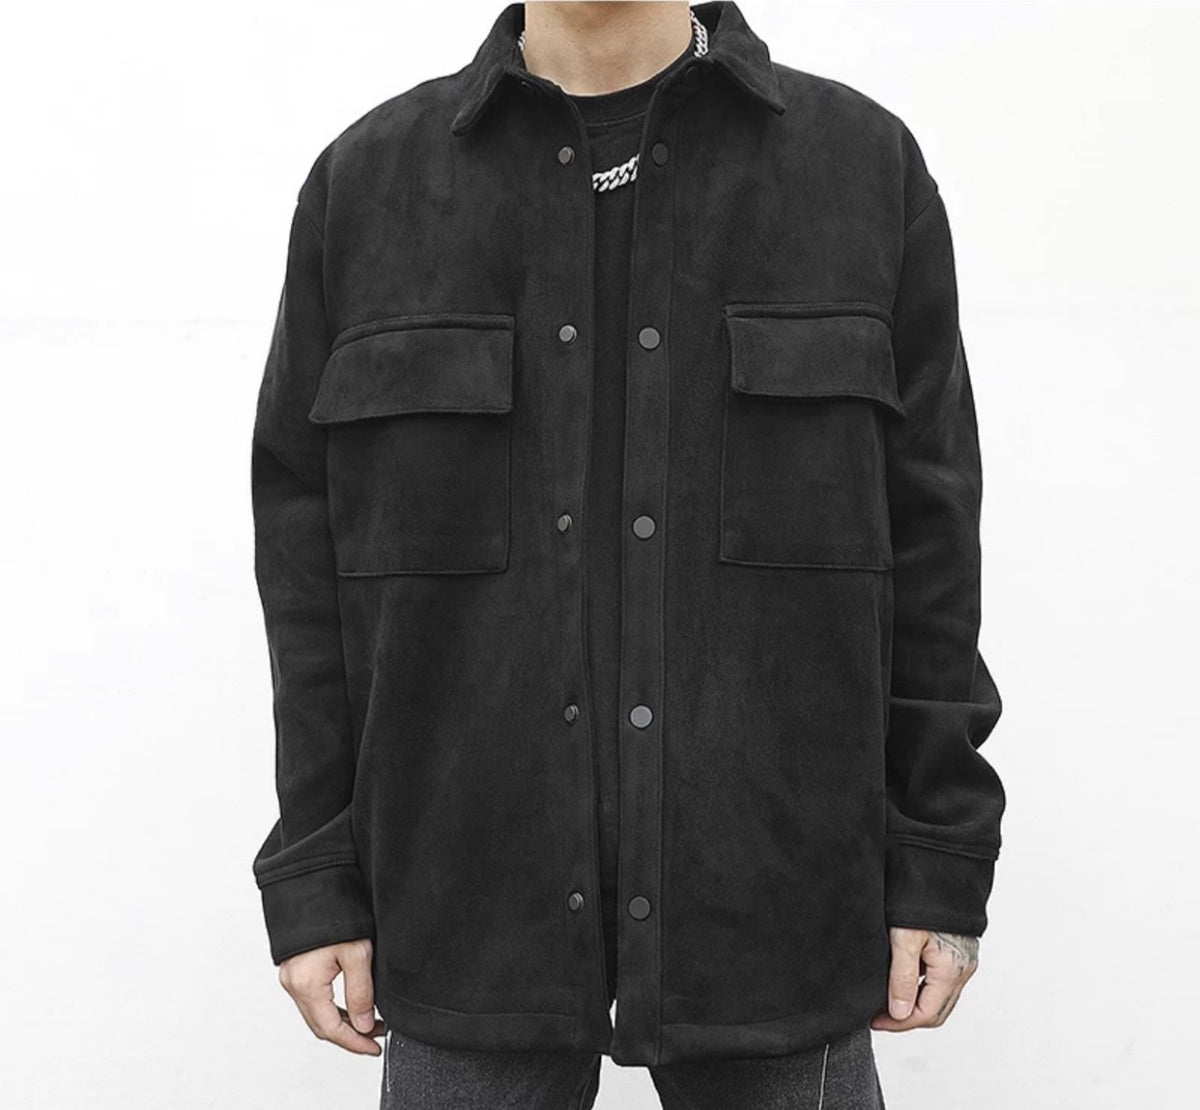 M.P.R Clothing co Black Oversized Suede Shirt